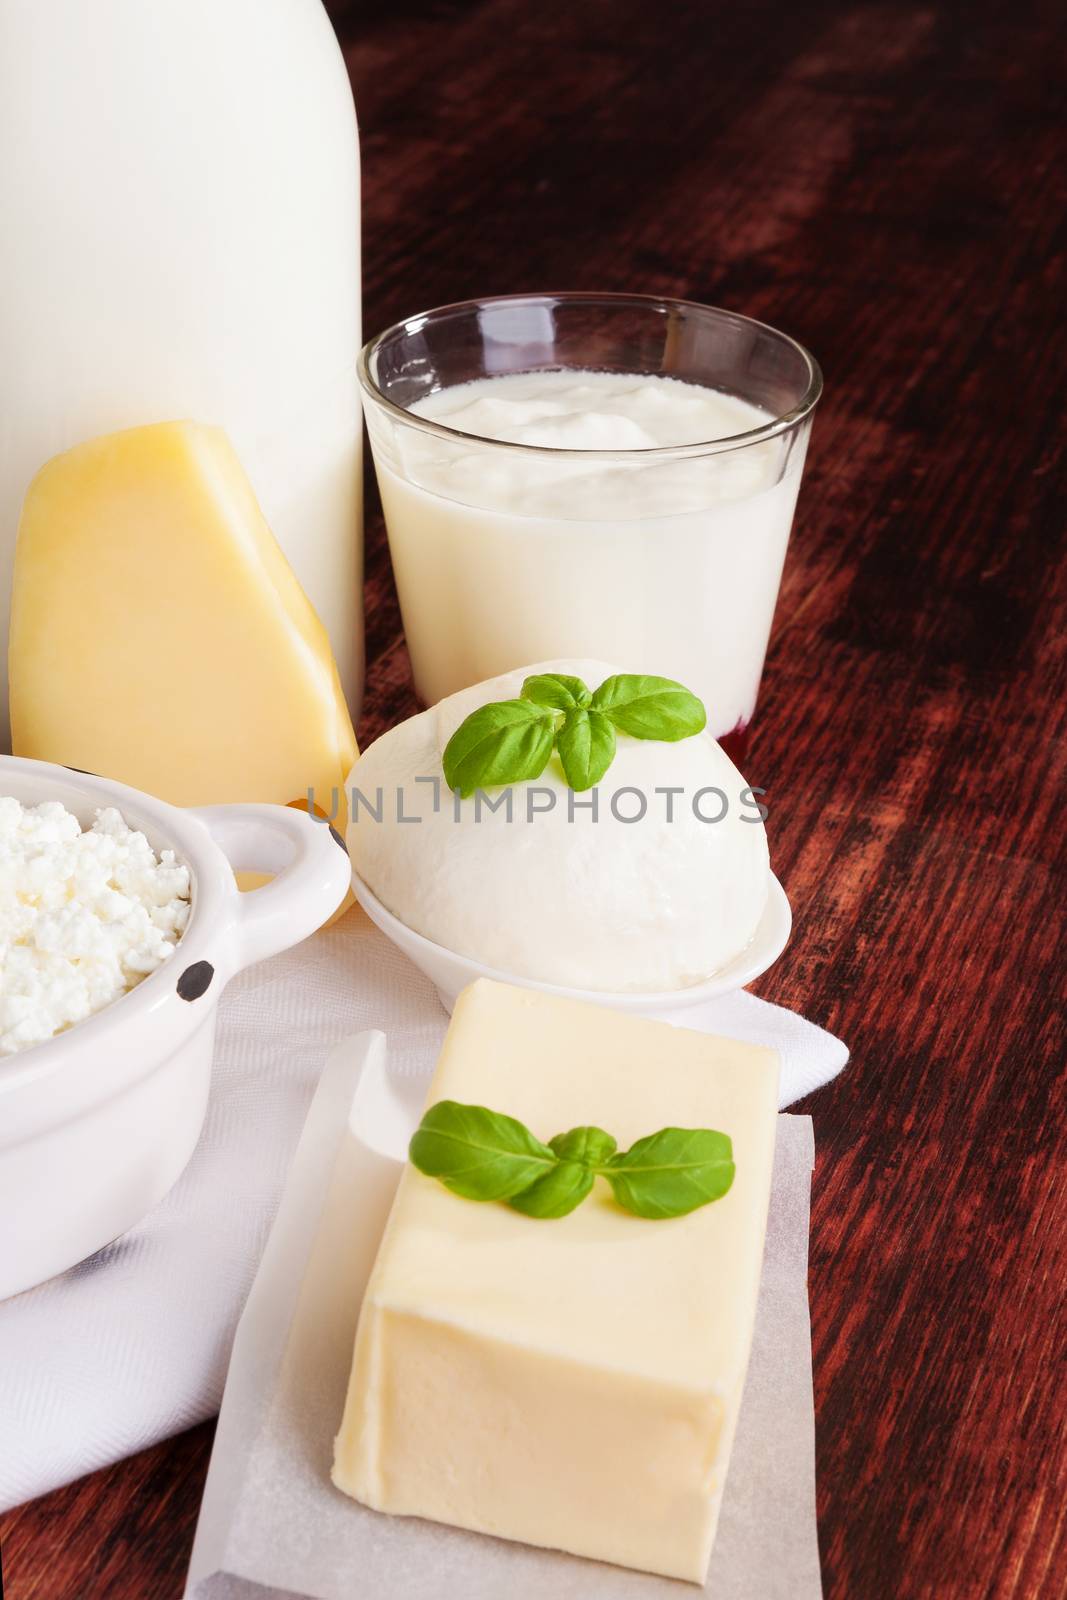 Dairy products milk, cheese, yogurt and curd on dark wooden background. Culinary healthy dairy products.